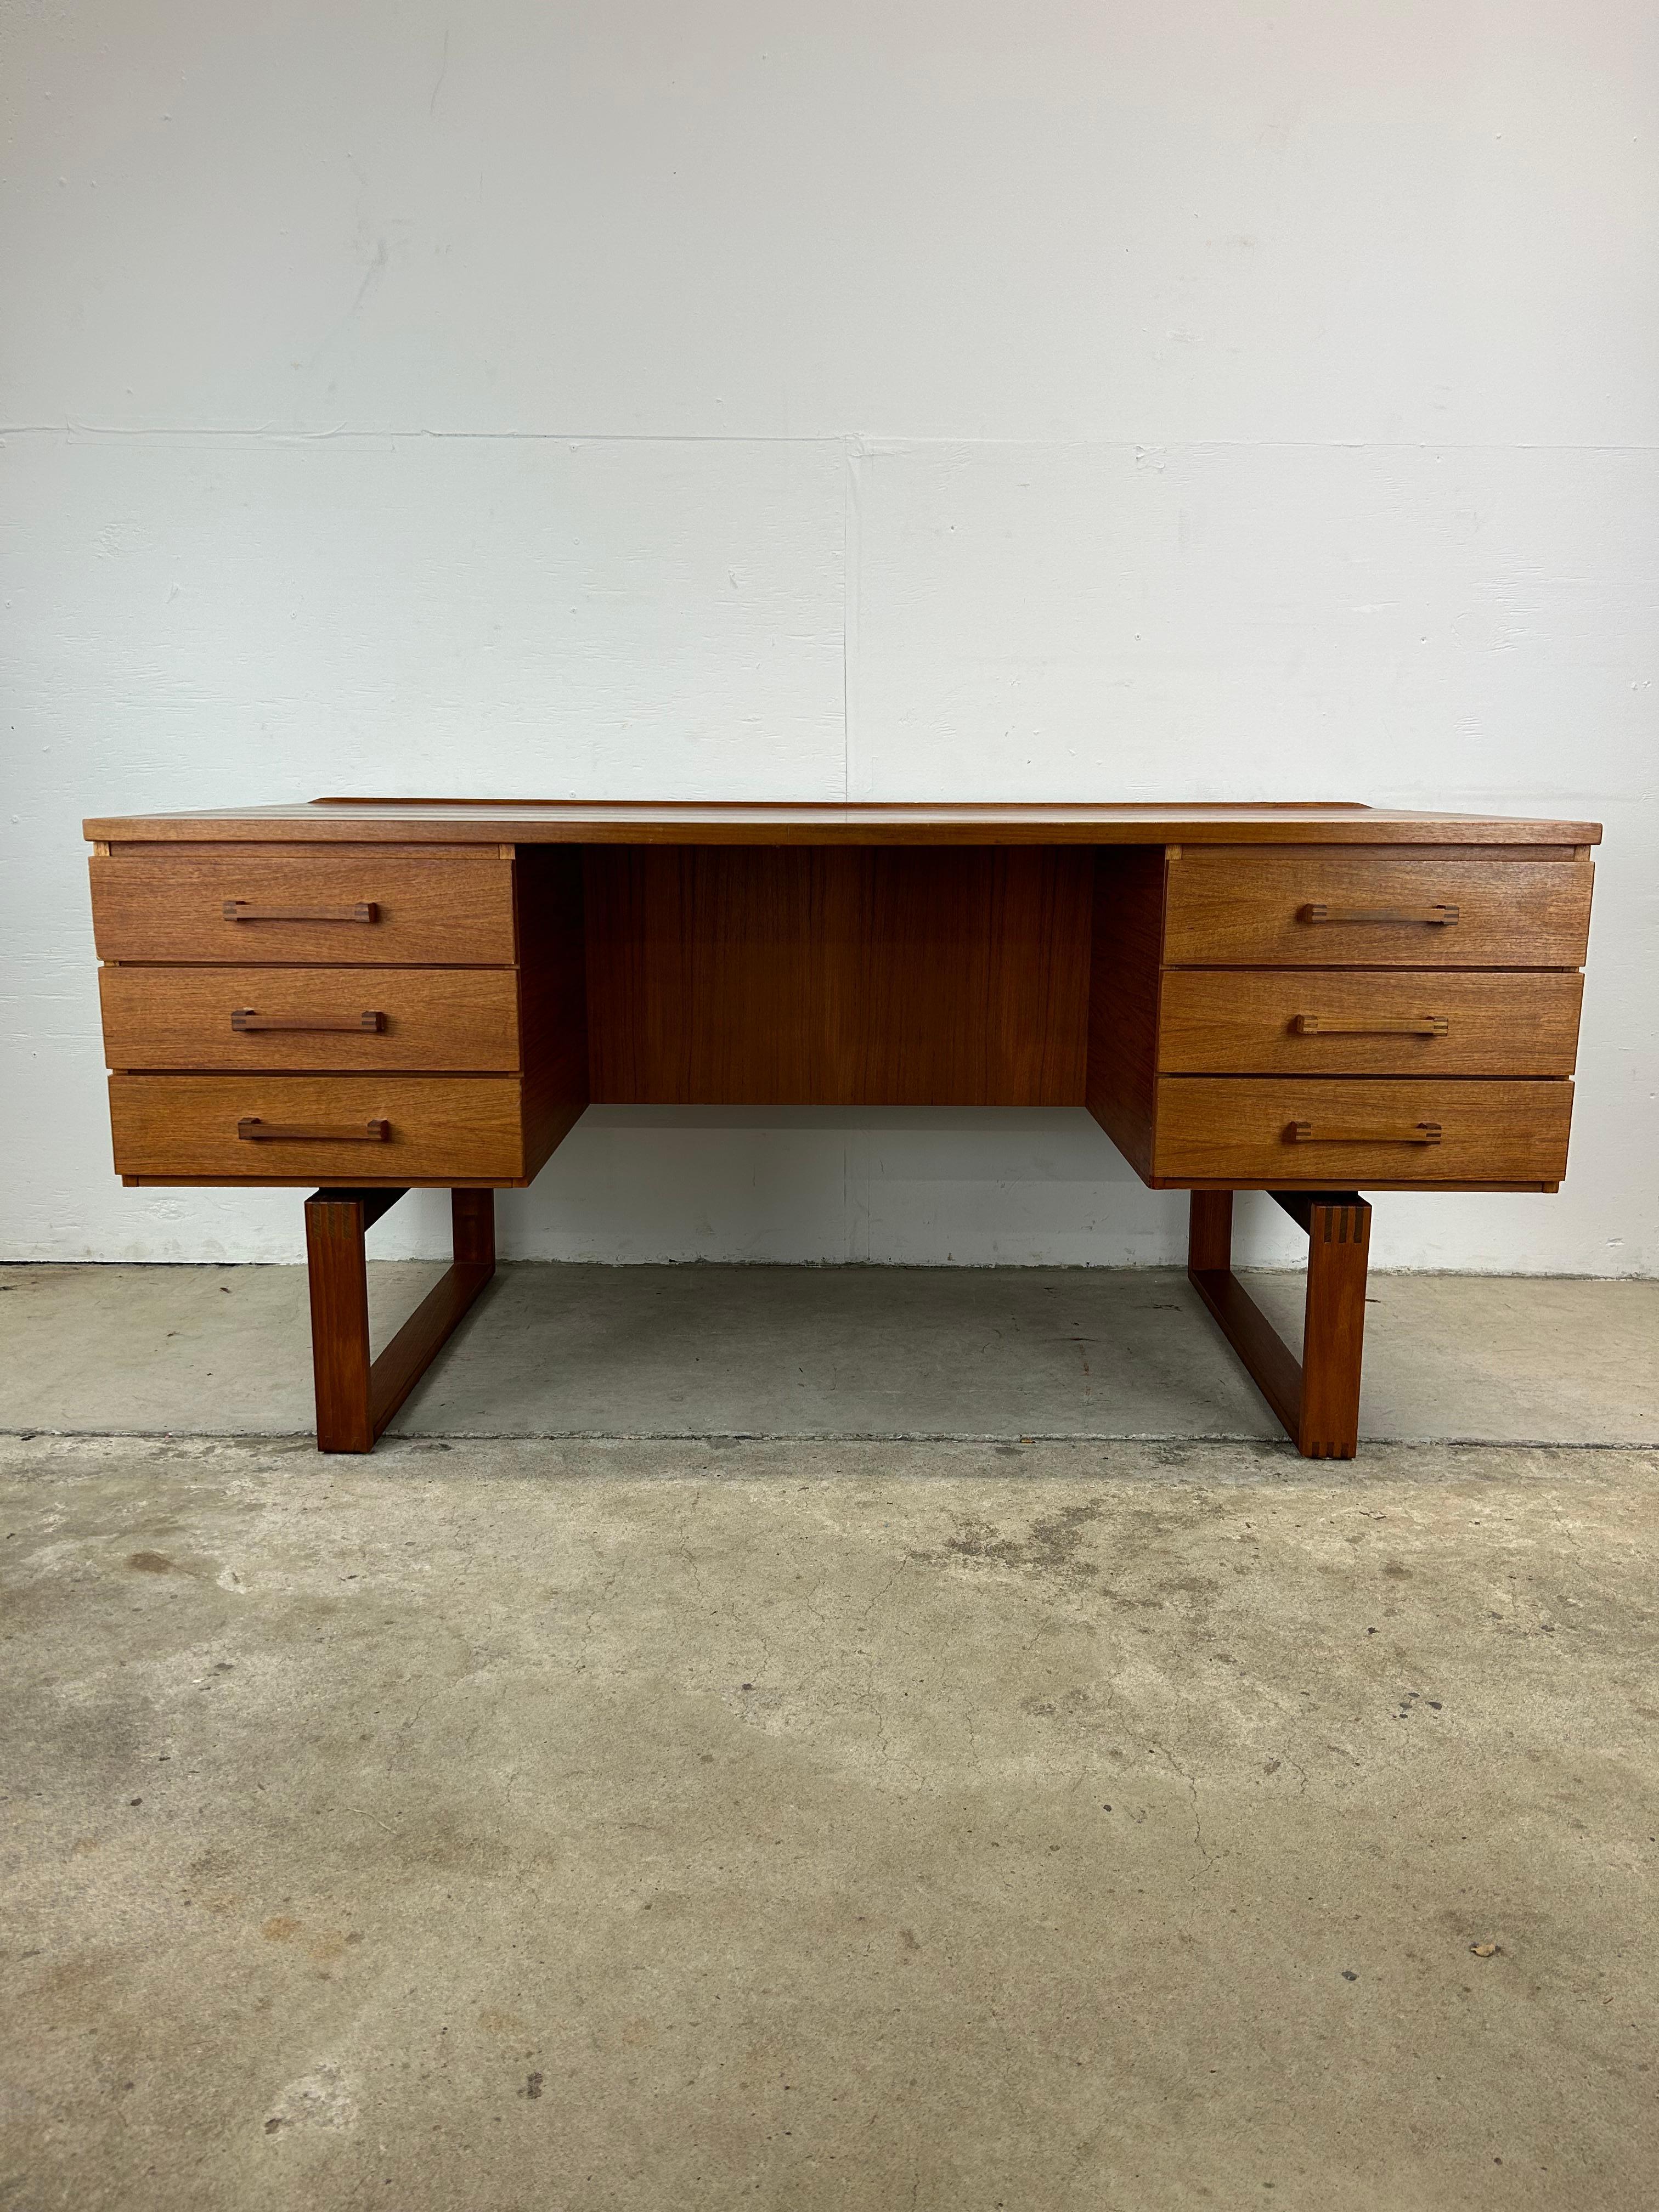 This Danish Modern executive writing desk features teak construction with original finish, six dovetailed drawers with sculpted wood pulls, opened shelving area in the finished back for books, and sled legs.

Please check out our other listings for